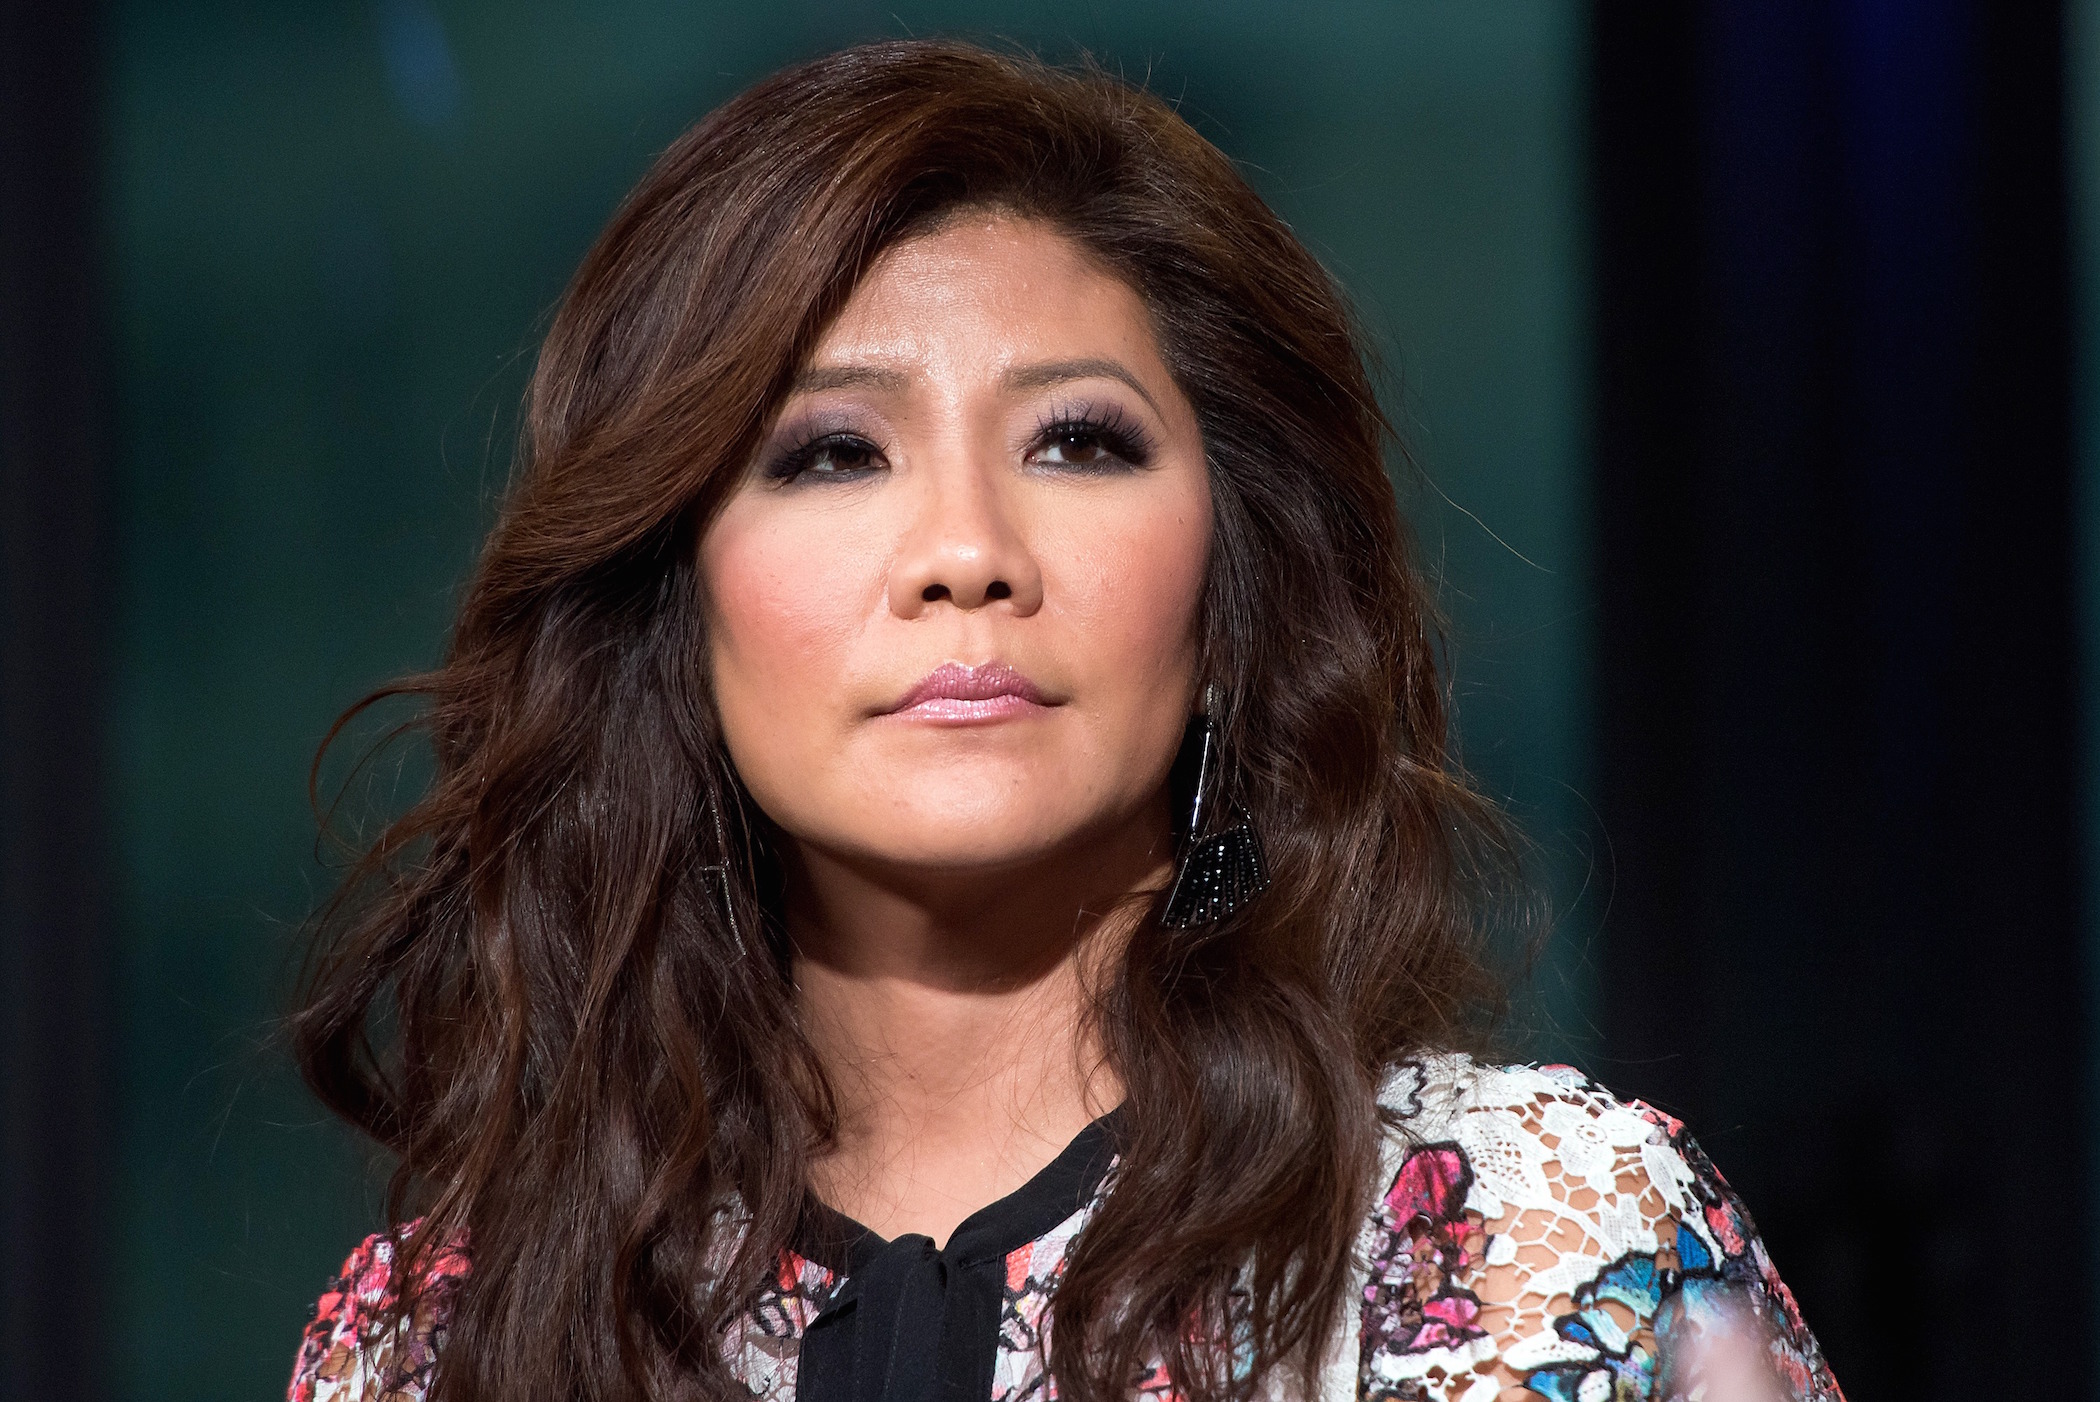 Julie Chen attends the AOL Build Speaker Series to discuss "The Talk&q...